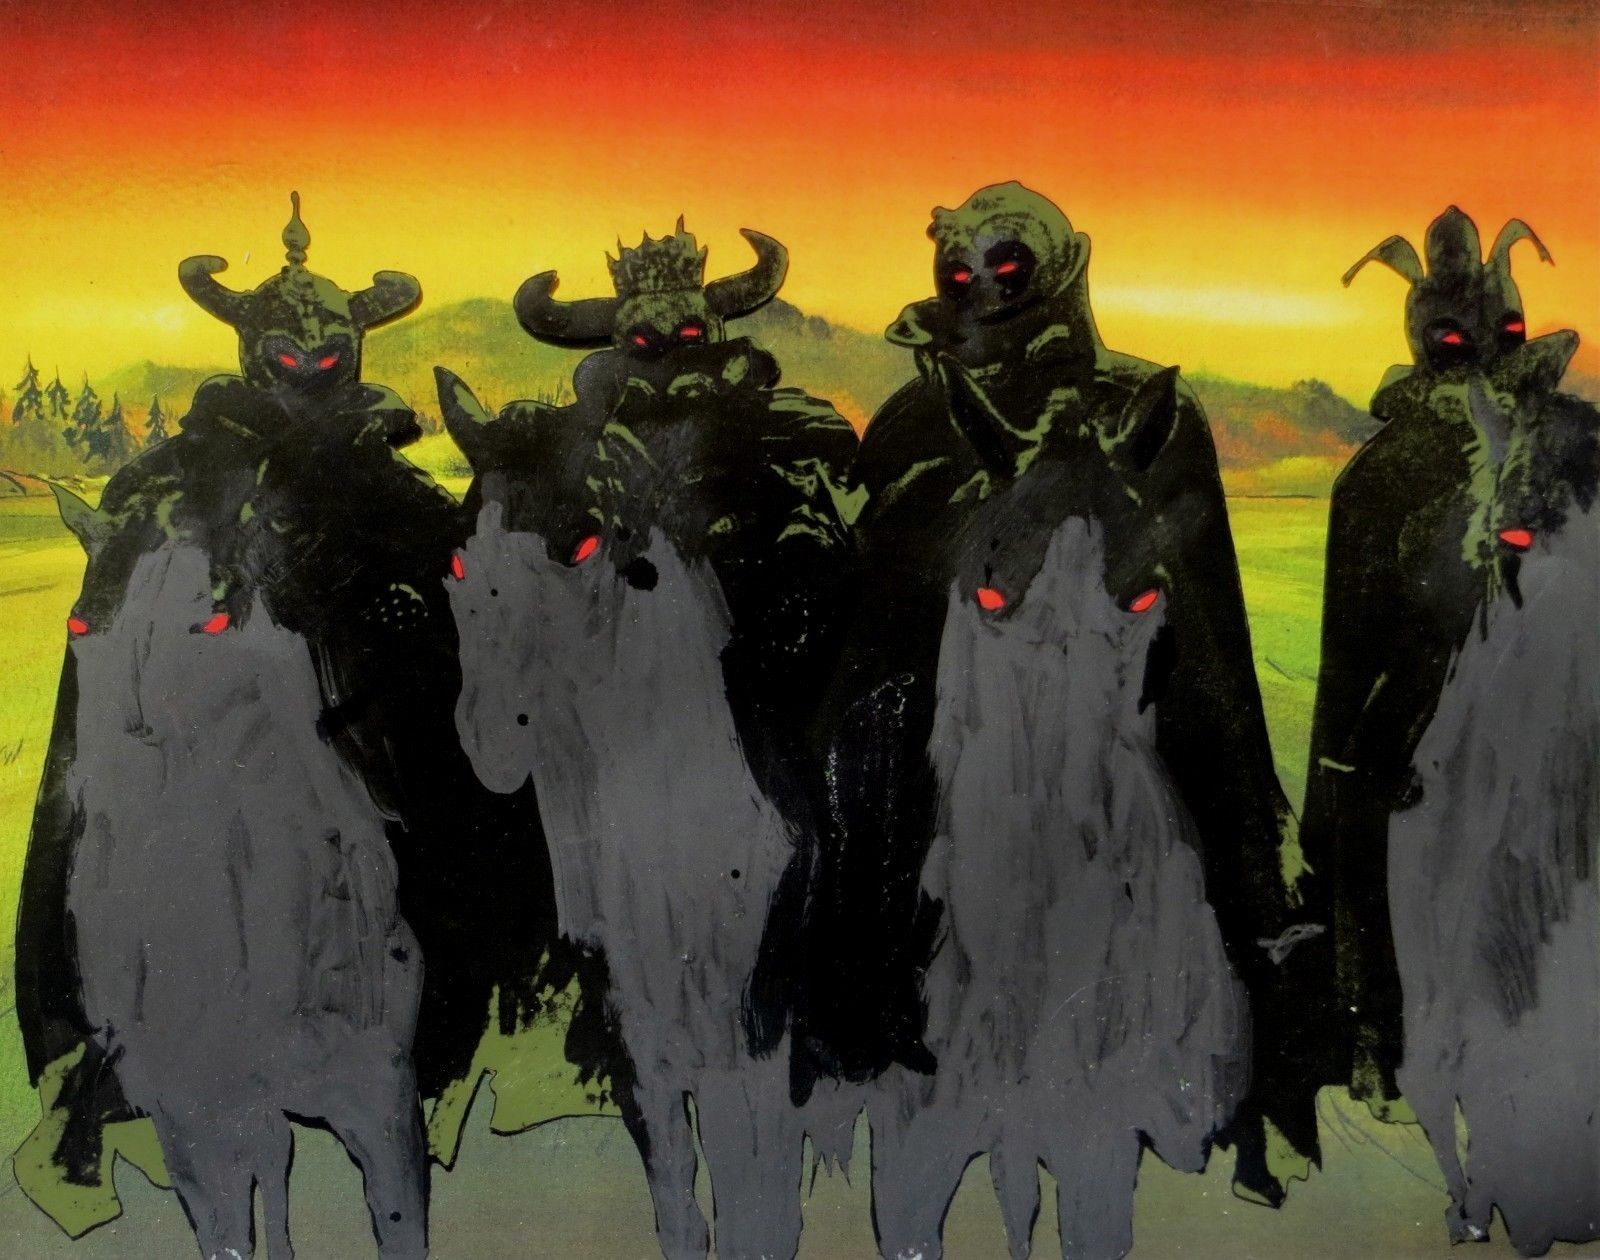 Four witch-kings sit astride black steeds.